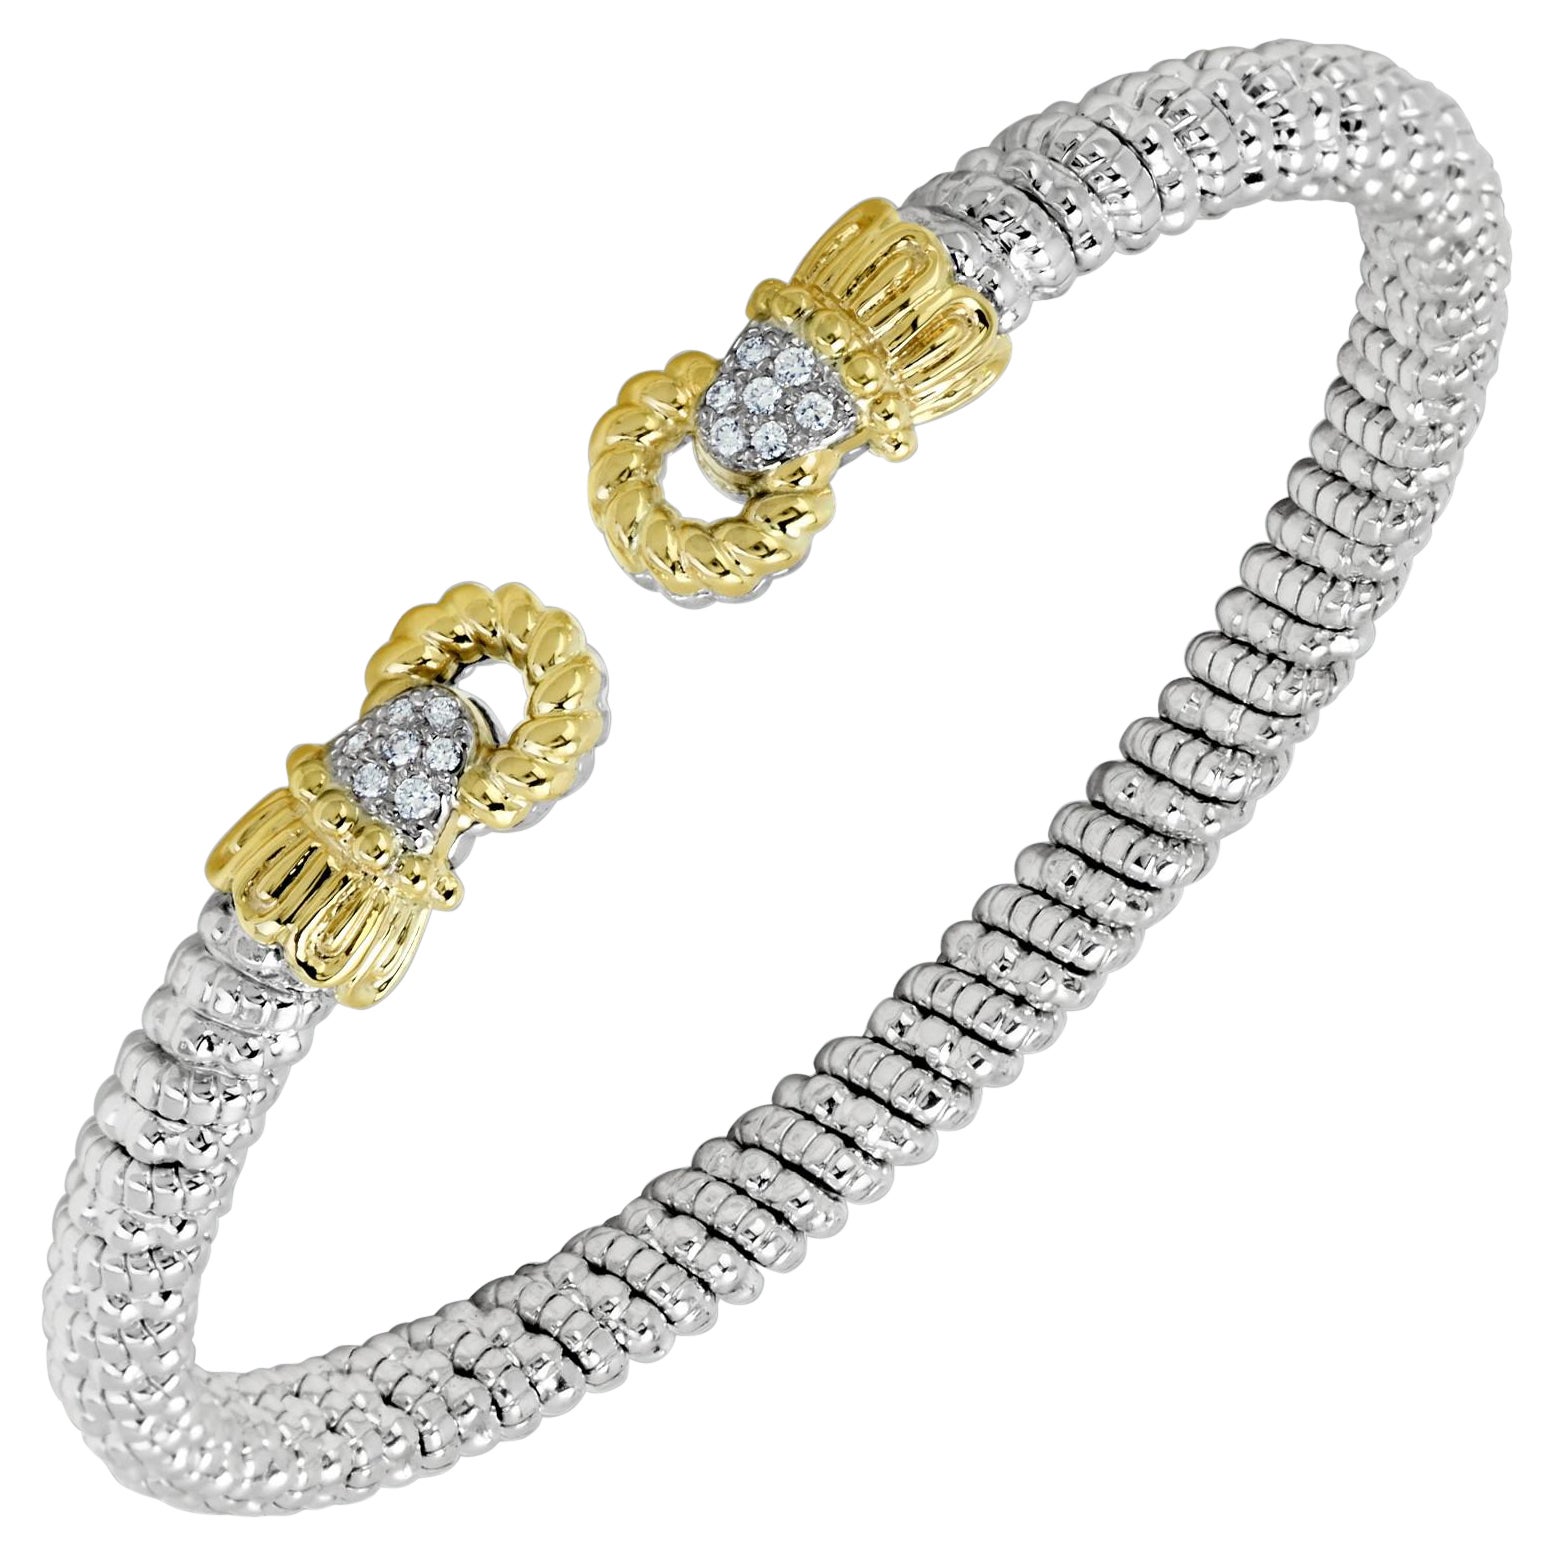 Vahan Open Bangle Bracelet with Diamonds in 14K Yellow Gold and Silver For Sale